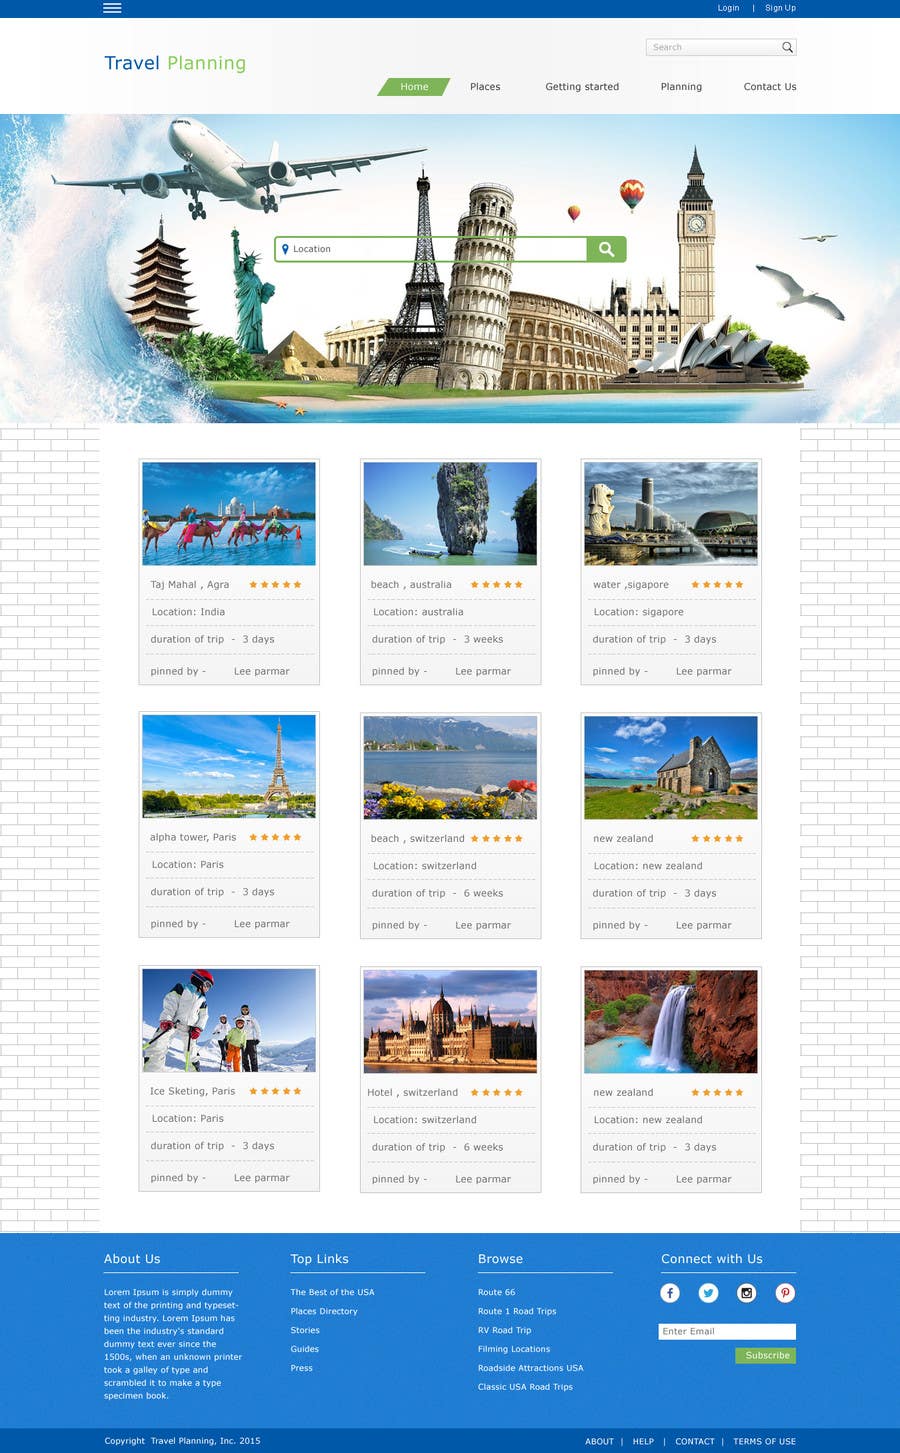 Wasilisho la Shindano #4 la                                                 Design for travel planning site (landing page and initial interaction)
                                            